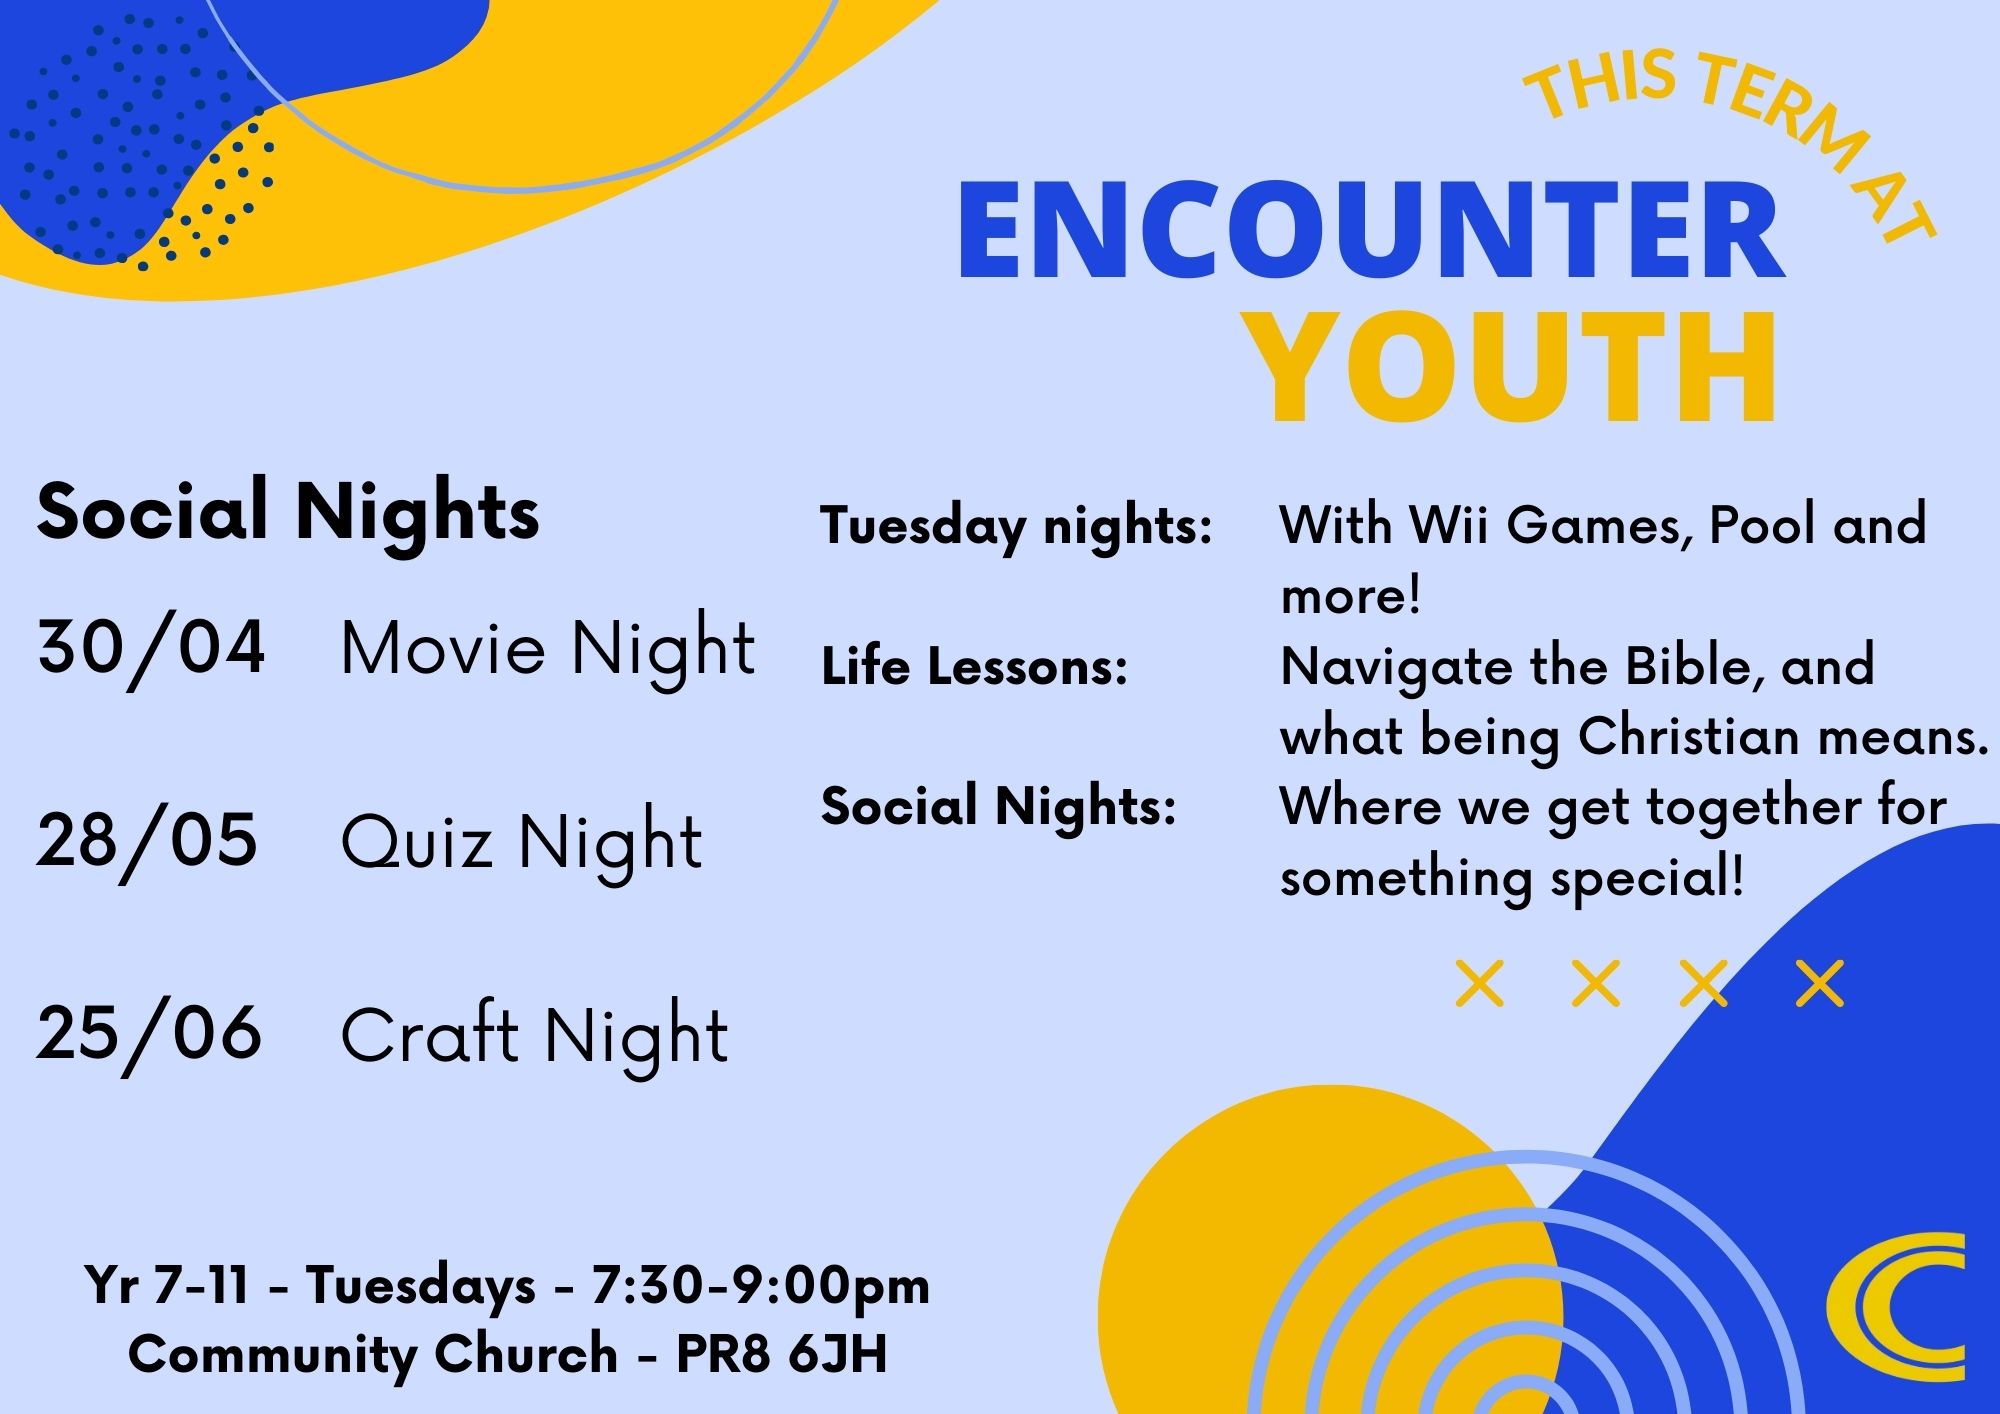 https://www.communitychurch.org.uk/storage/assets/Encounter Youth Tuesday Timetable.jpg